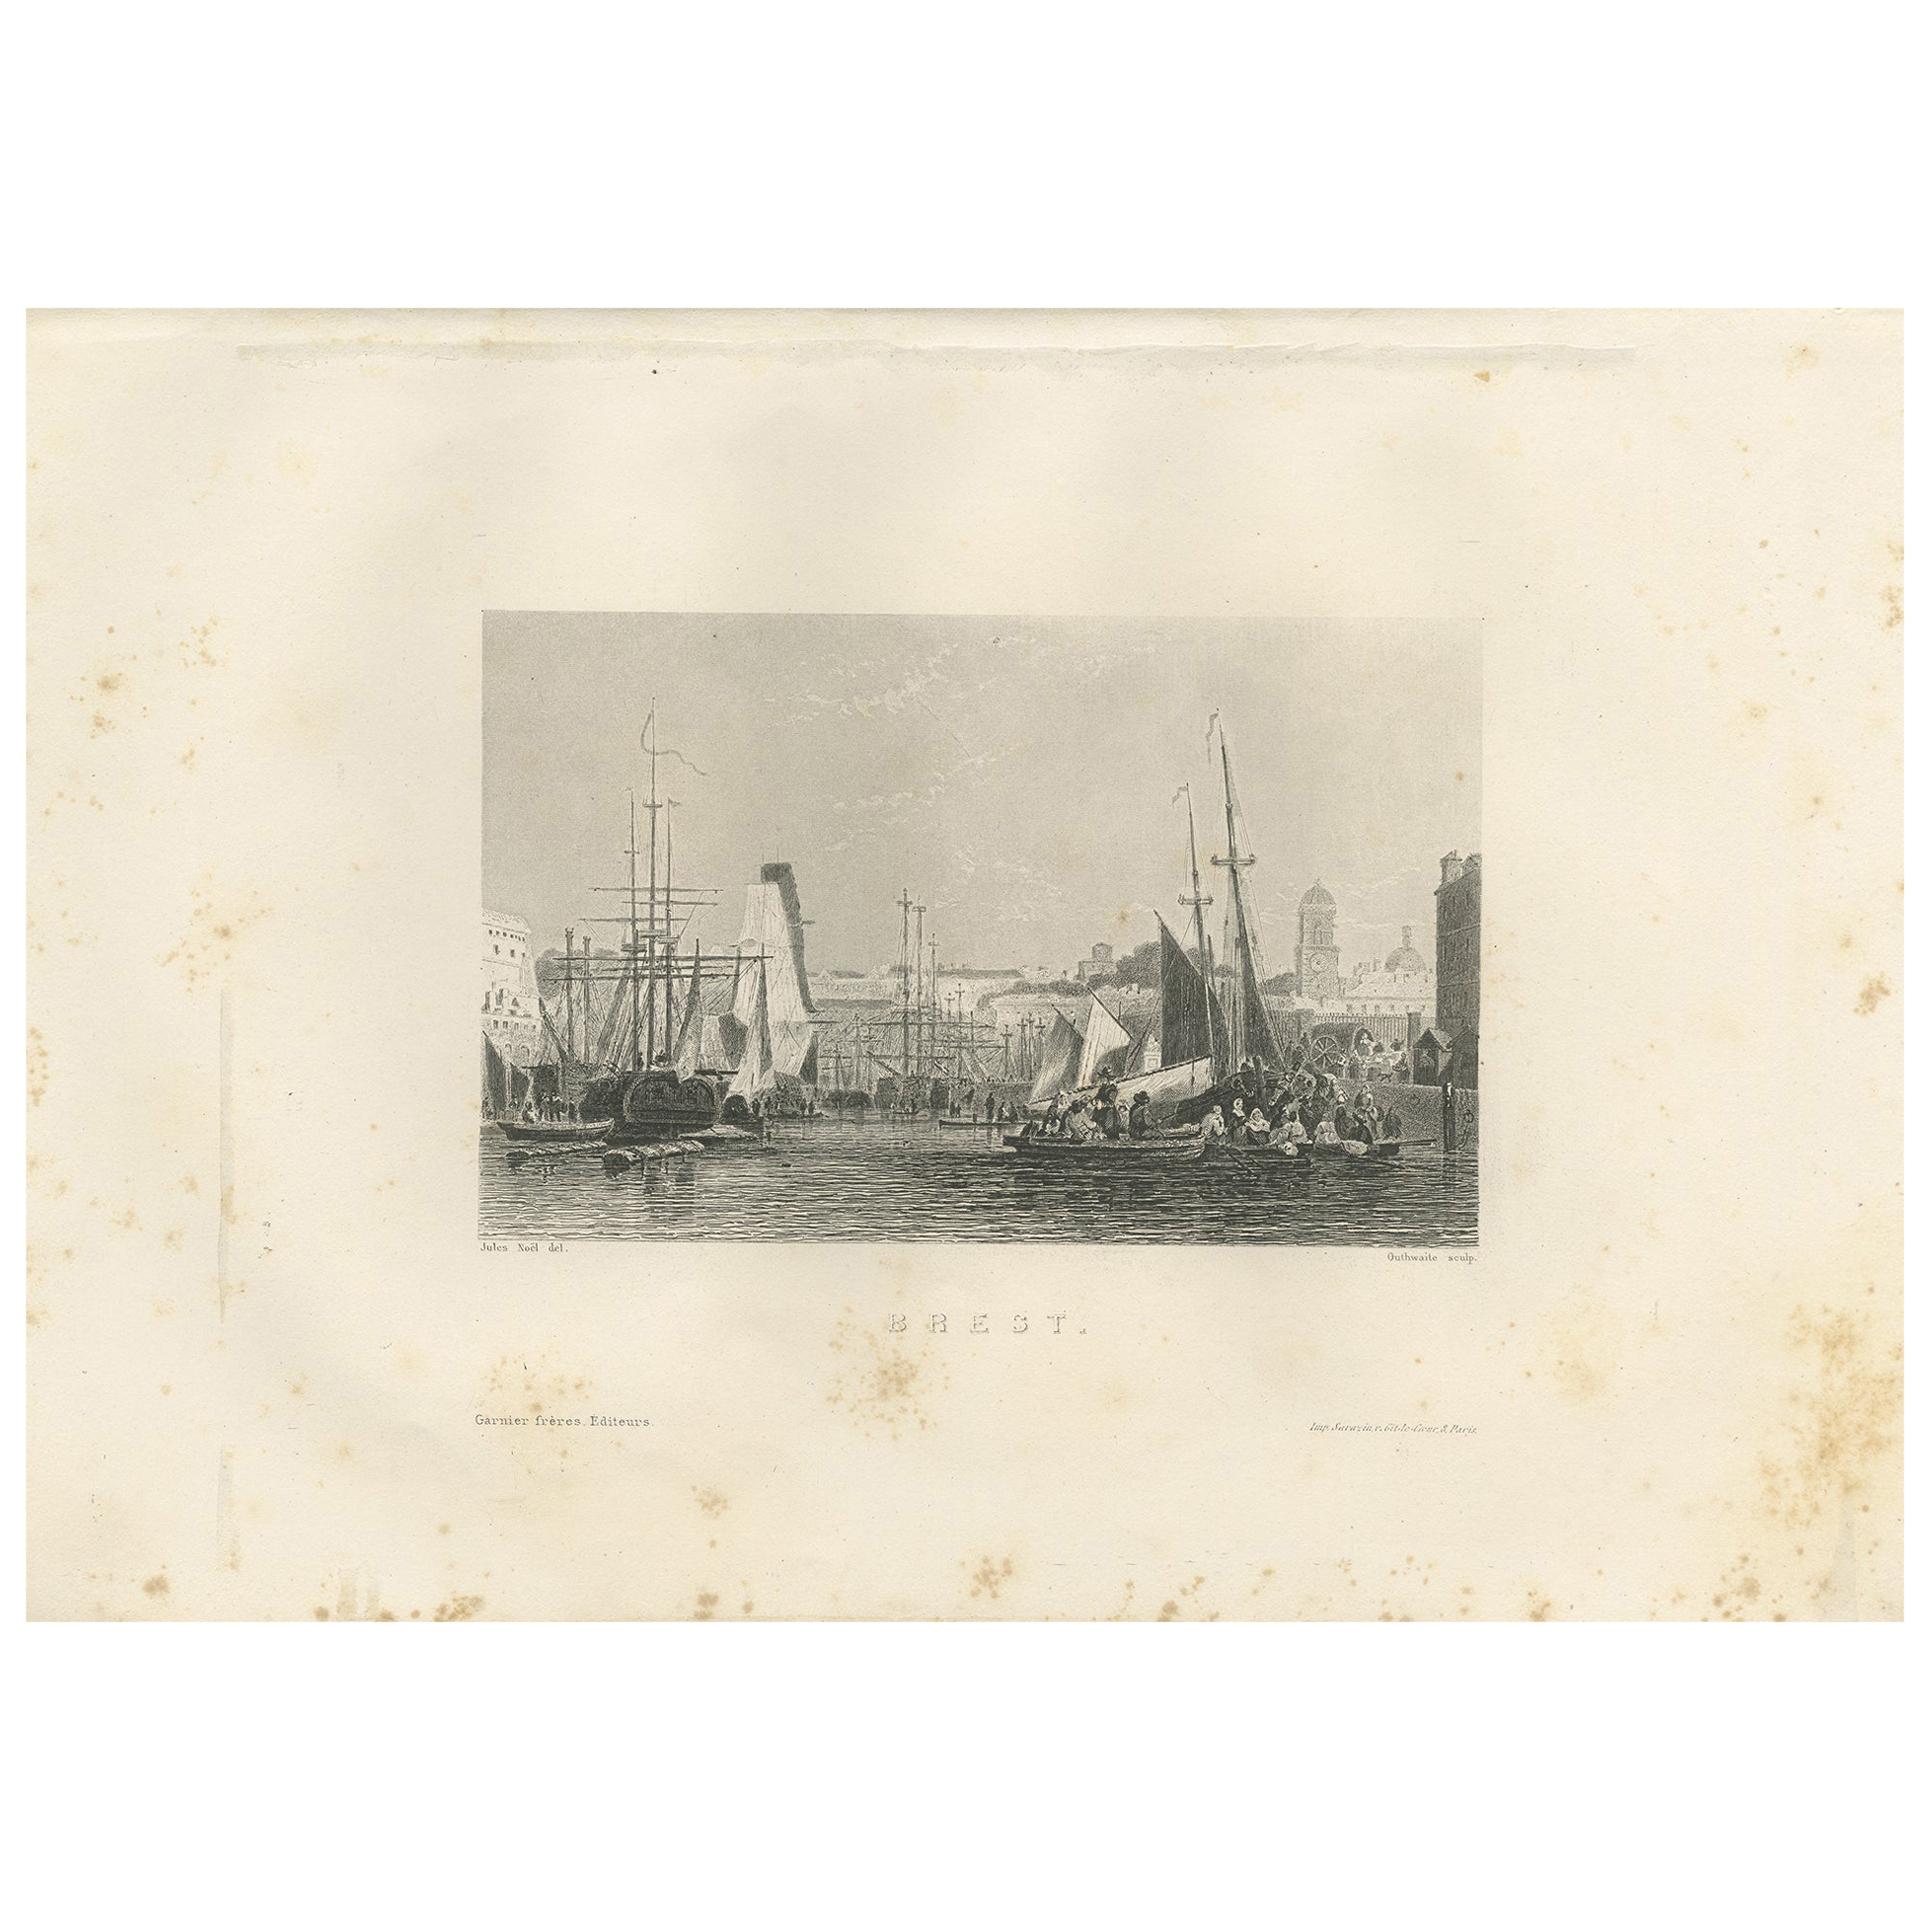 Antique Print of the City of Brest by Grégoire '1883' For Sale